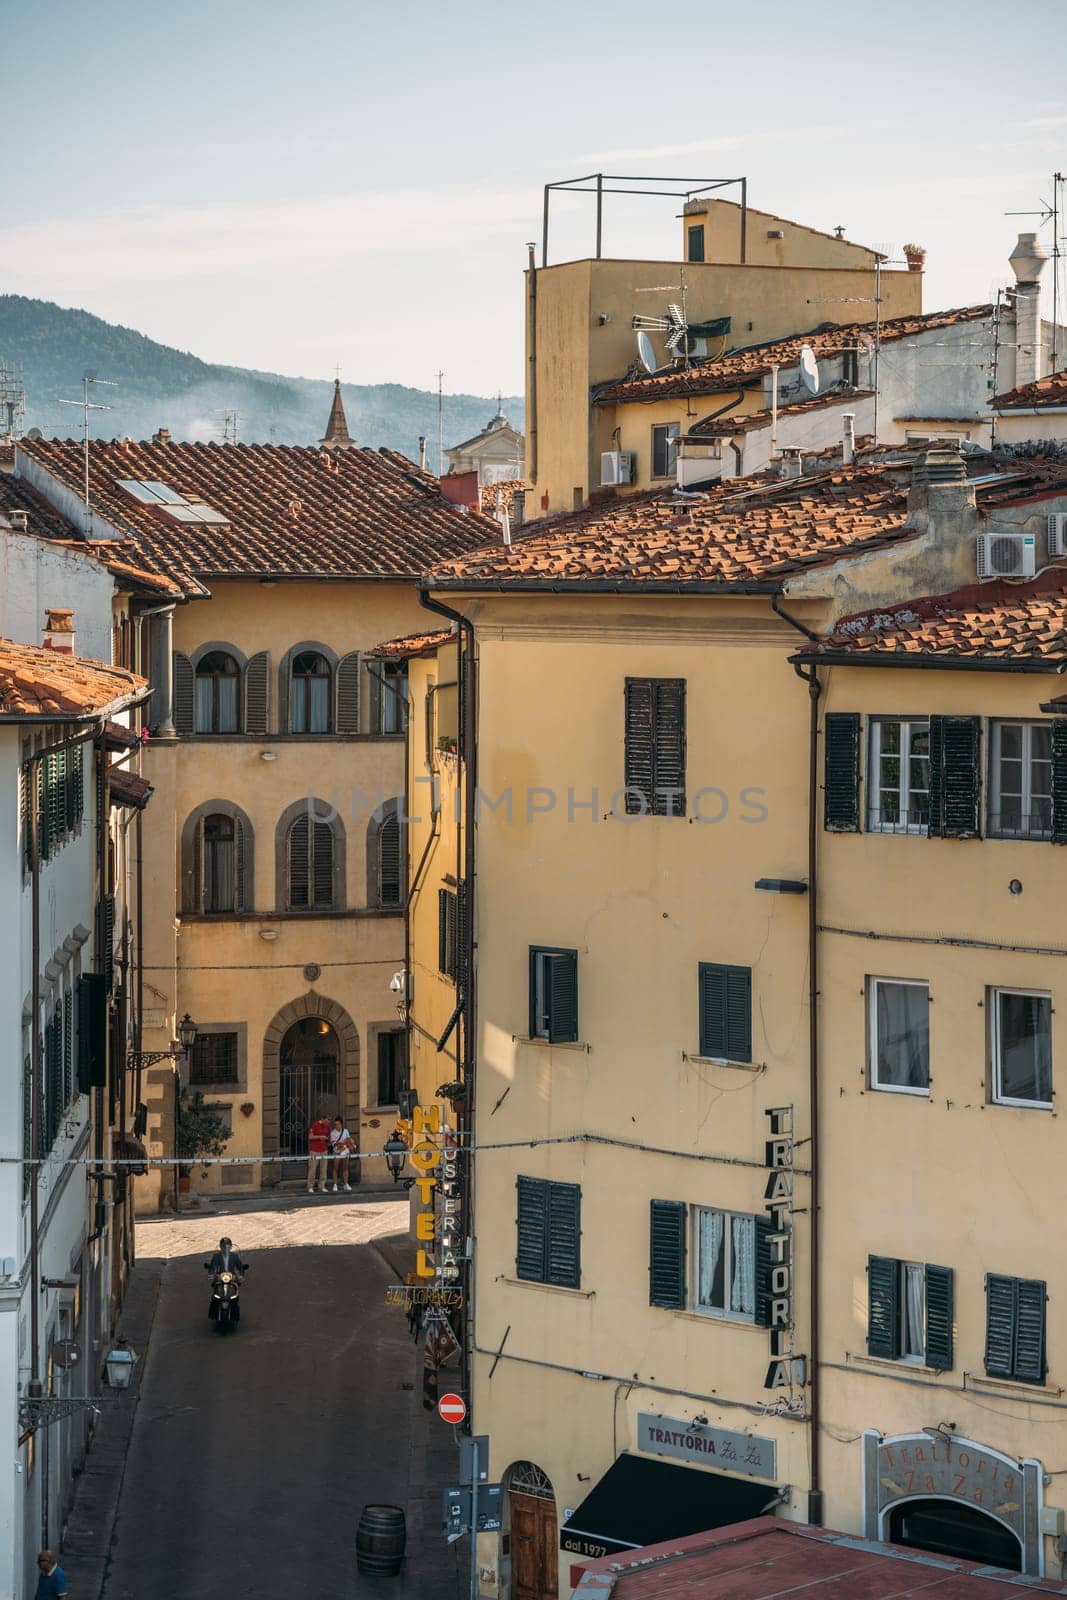 29 SEPTEMBER 2021, FLORENCIA, ITALY: Top view of a beautiful orange colored old tenement house with arches in Florence on a sunny warm summer day. Concept of beautiful old european architecture by apavlin